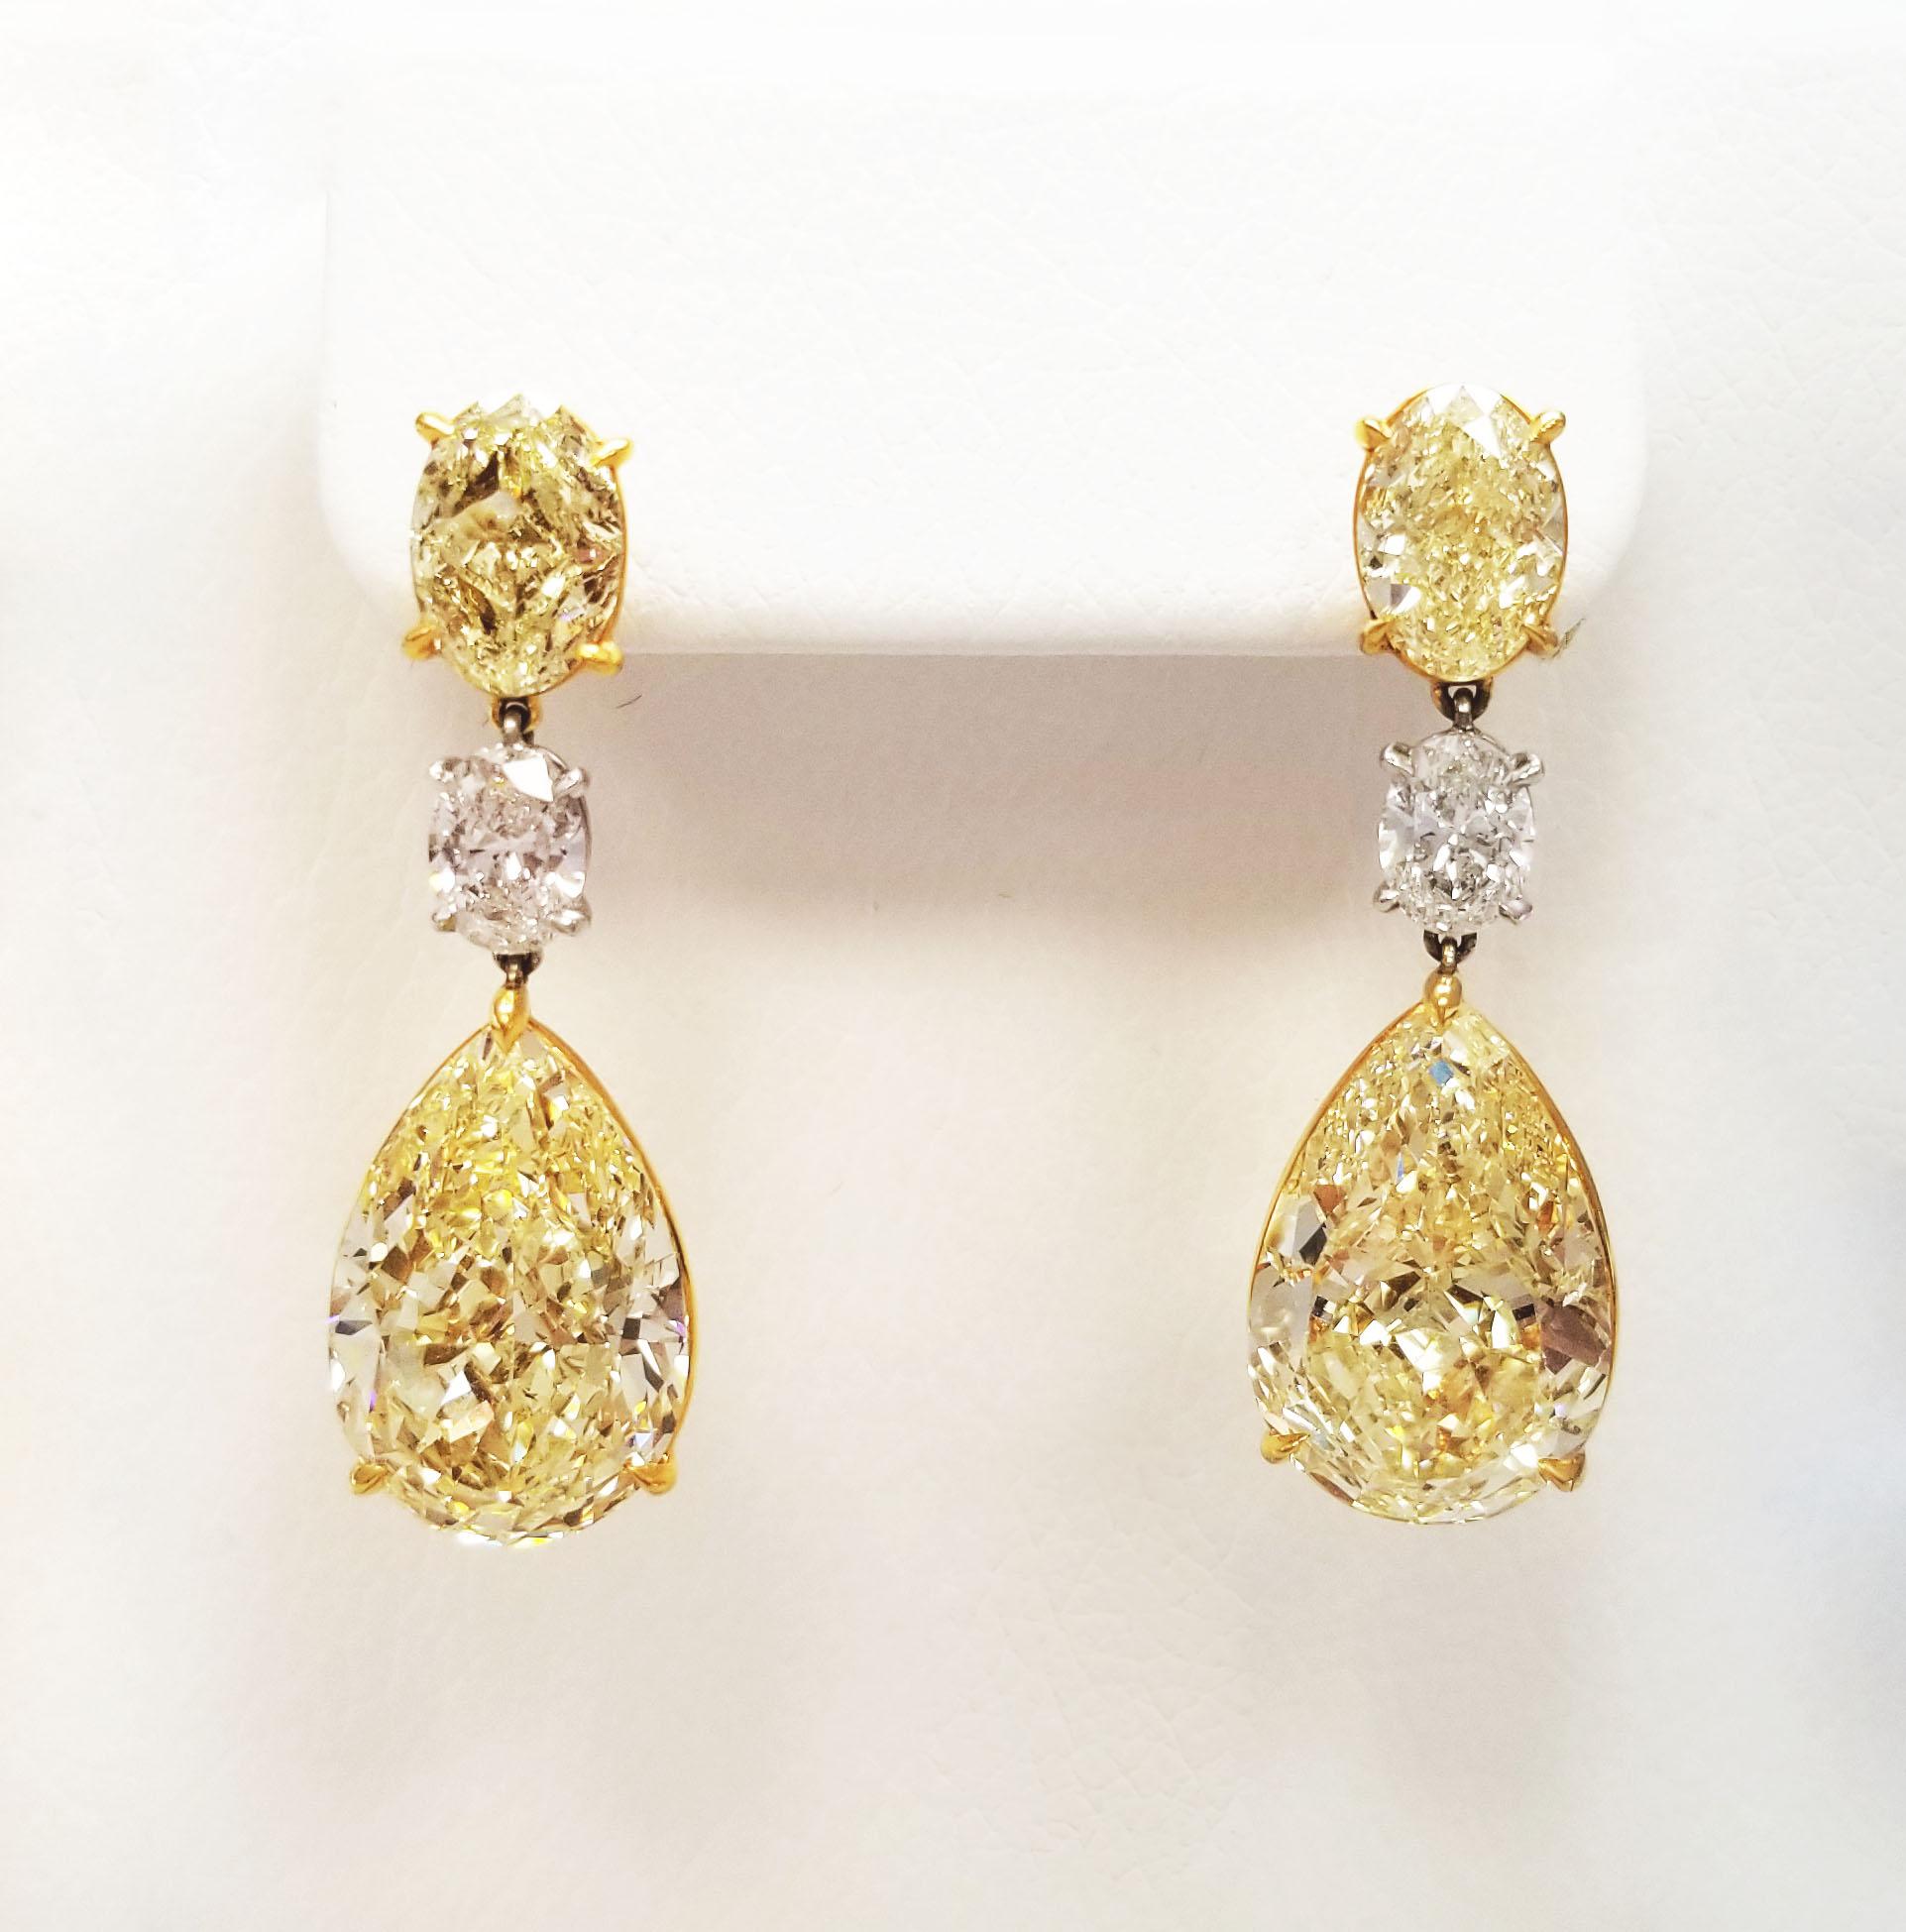 From SCARSELLI, world-renowned for investment grade natural fancy color diamonds, comes this 3 stones dangled earrings GIA certified: 2 matched pair Fancy Yellow pear shape of 8+ carat each, beautifully cut for dazzling brilliance, hanging from a